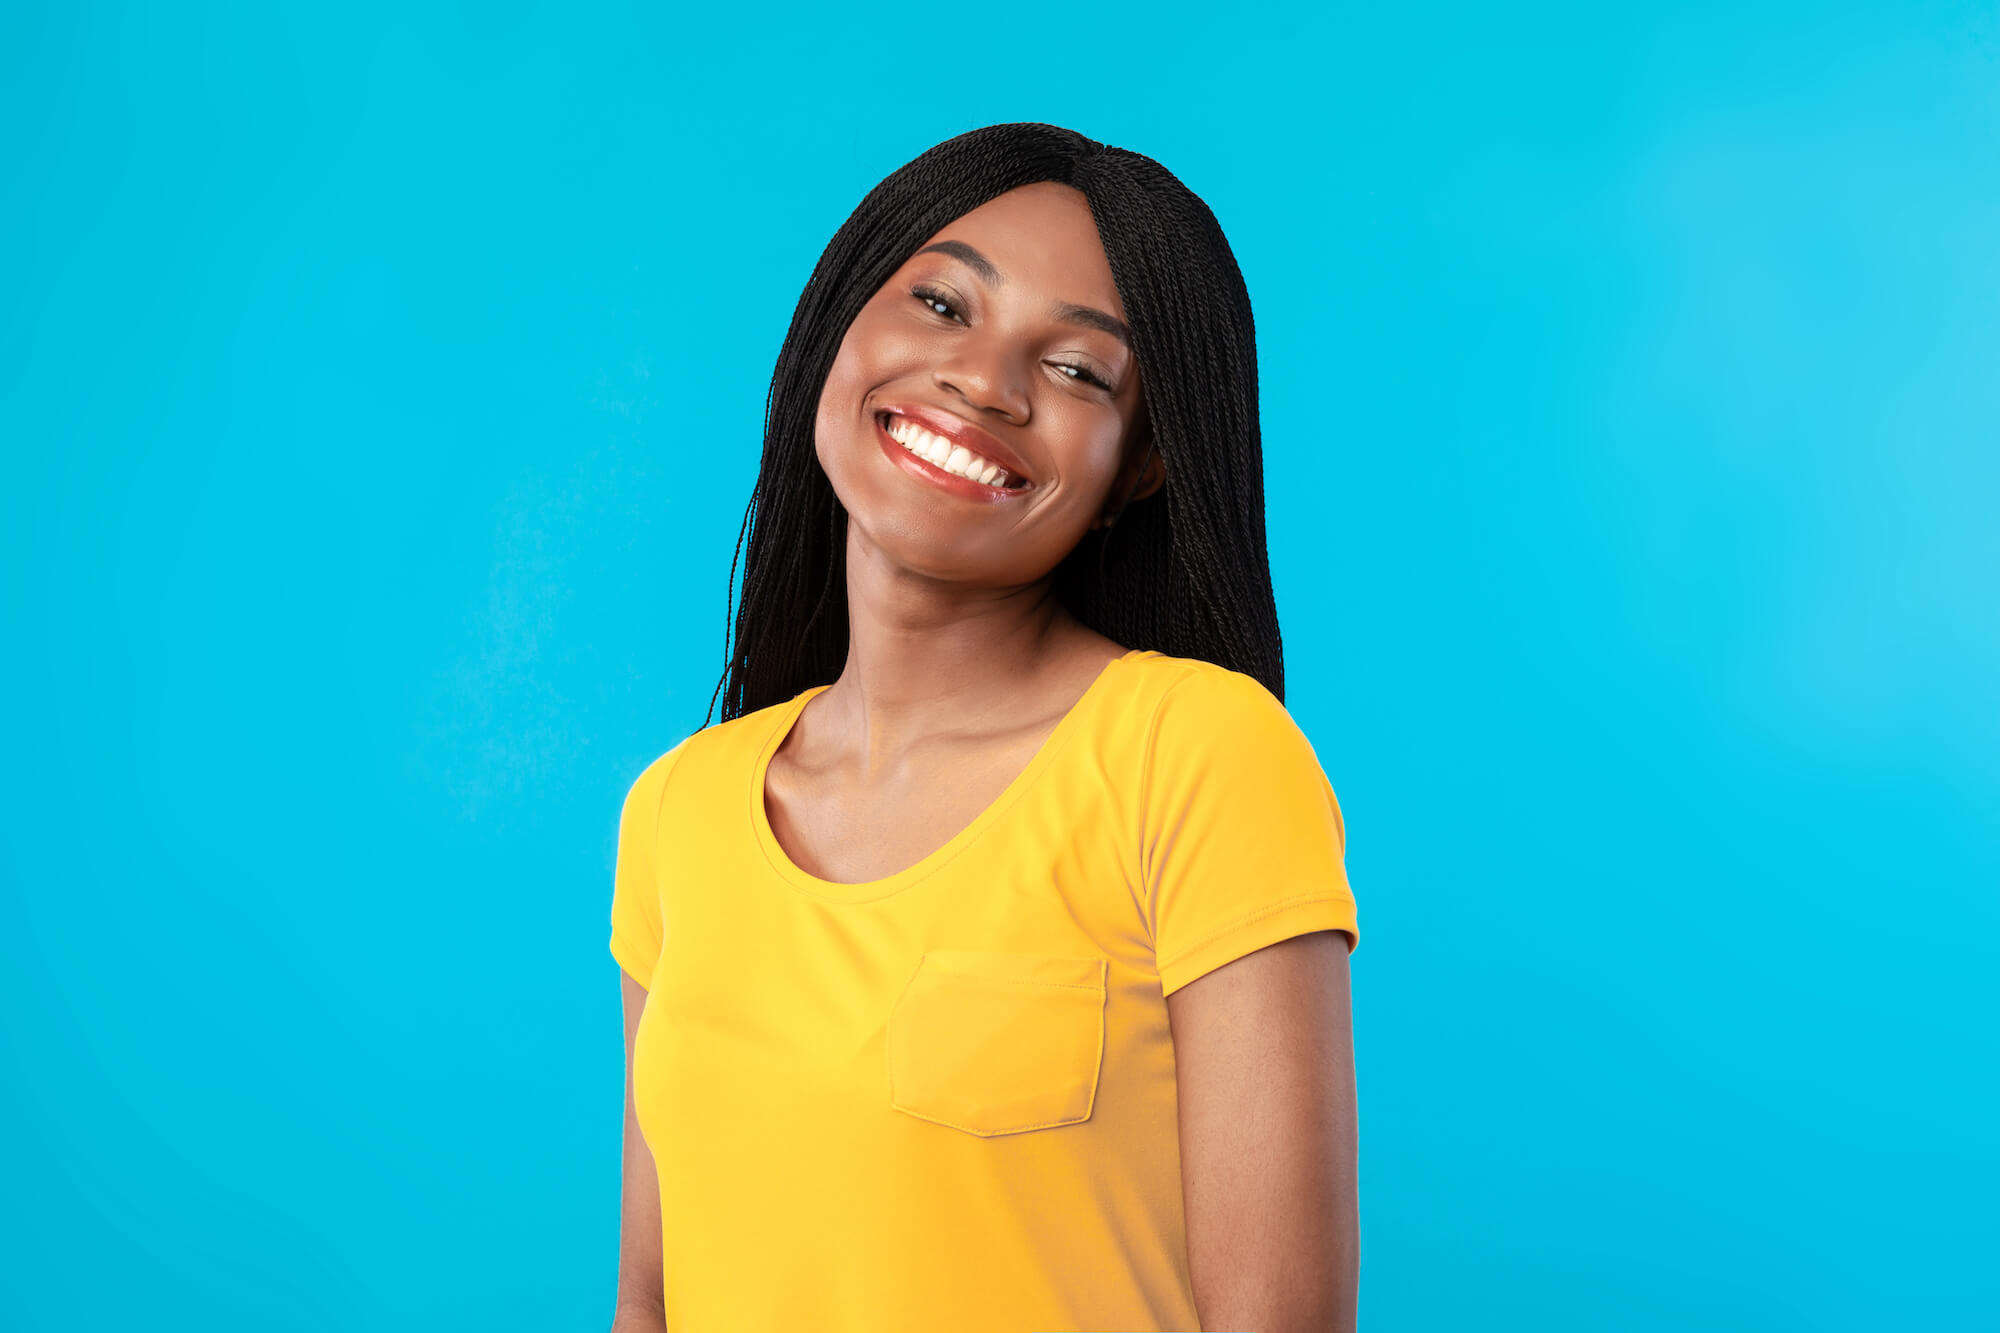 Woman in yellow shirt smiling at the camera in front of a blue background.